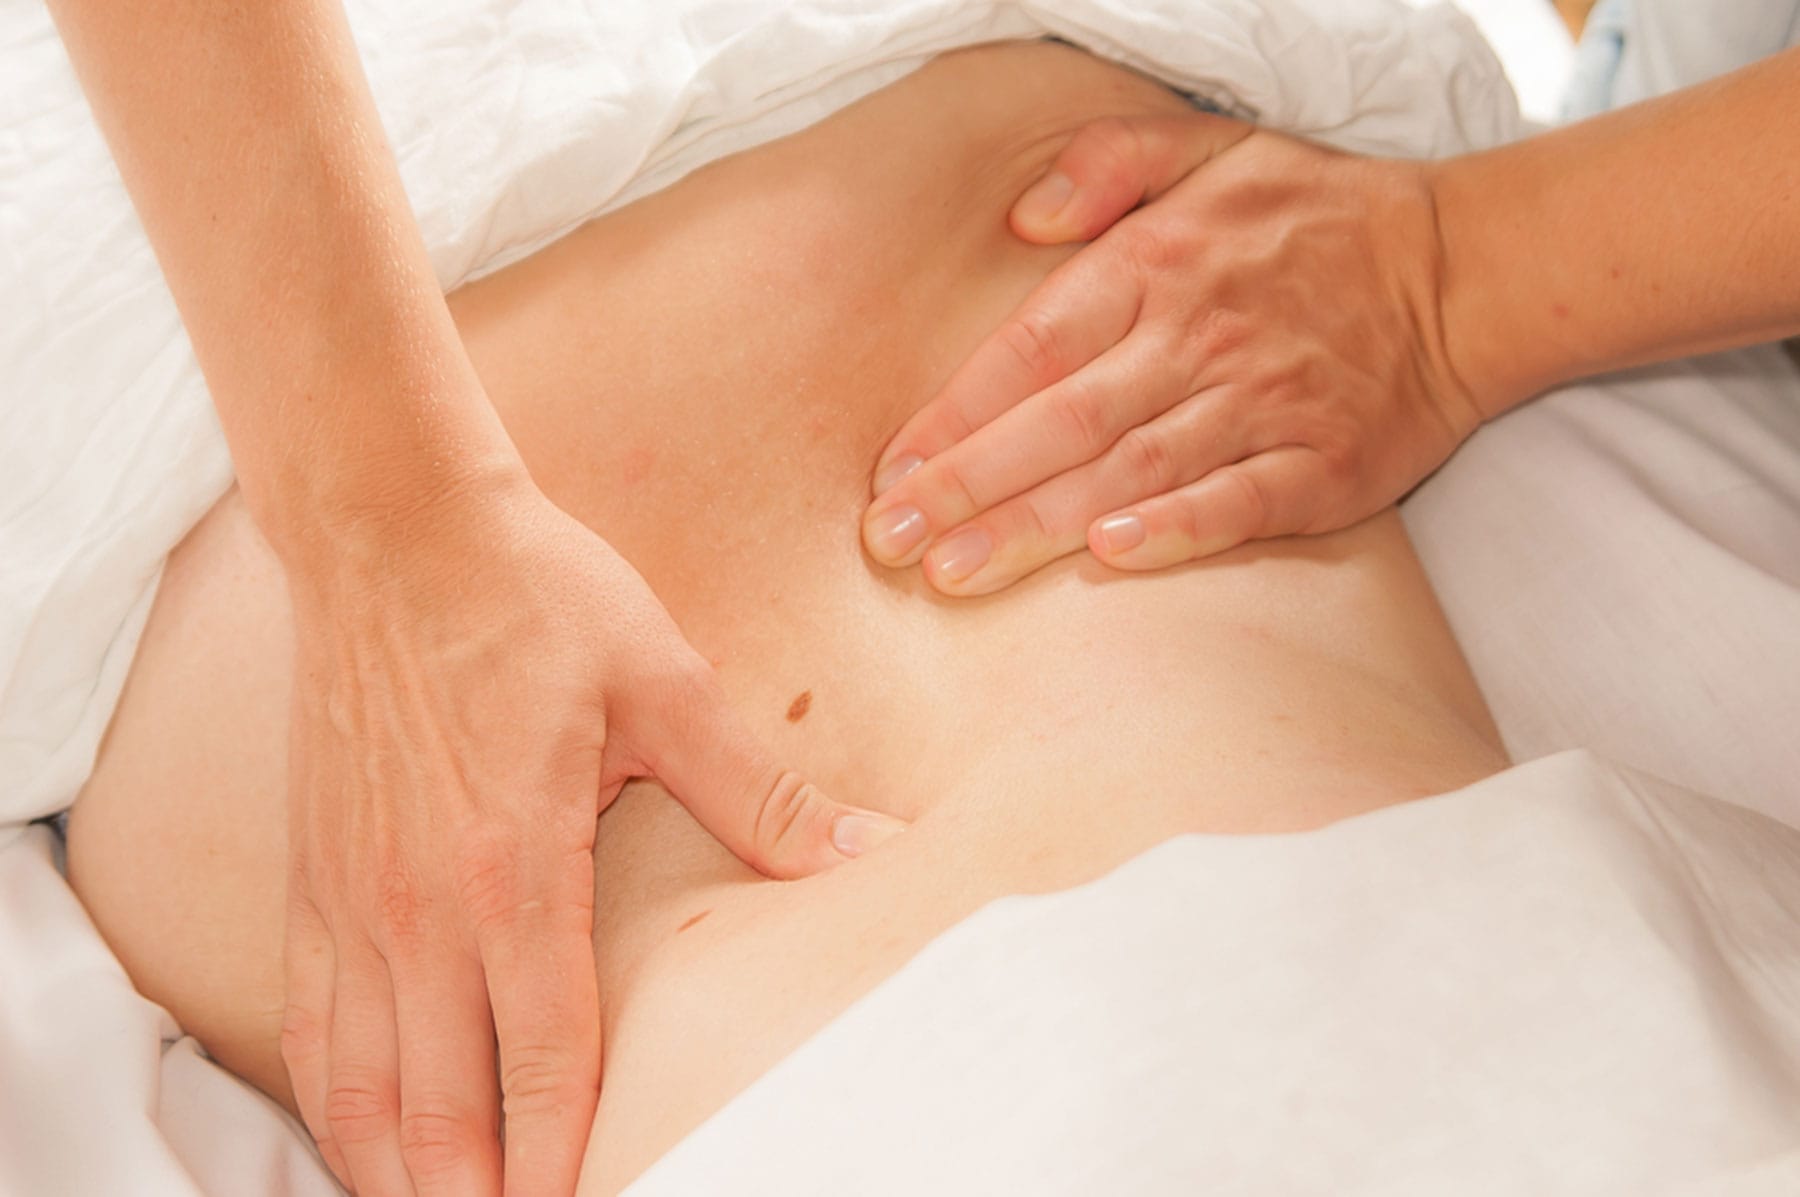 Close up of a persons back being massaged by a therapists hands with white sheets partially covering the person